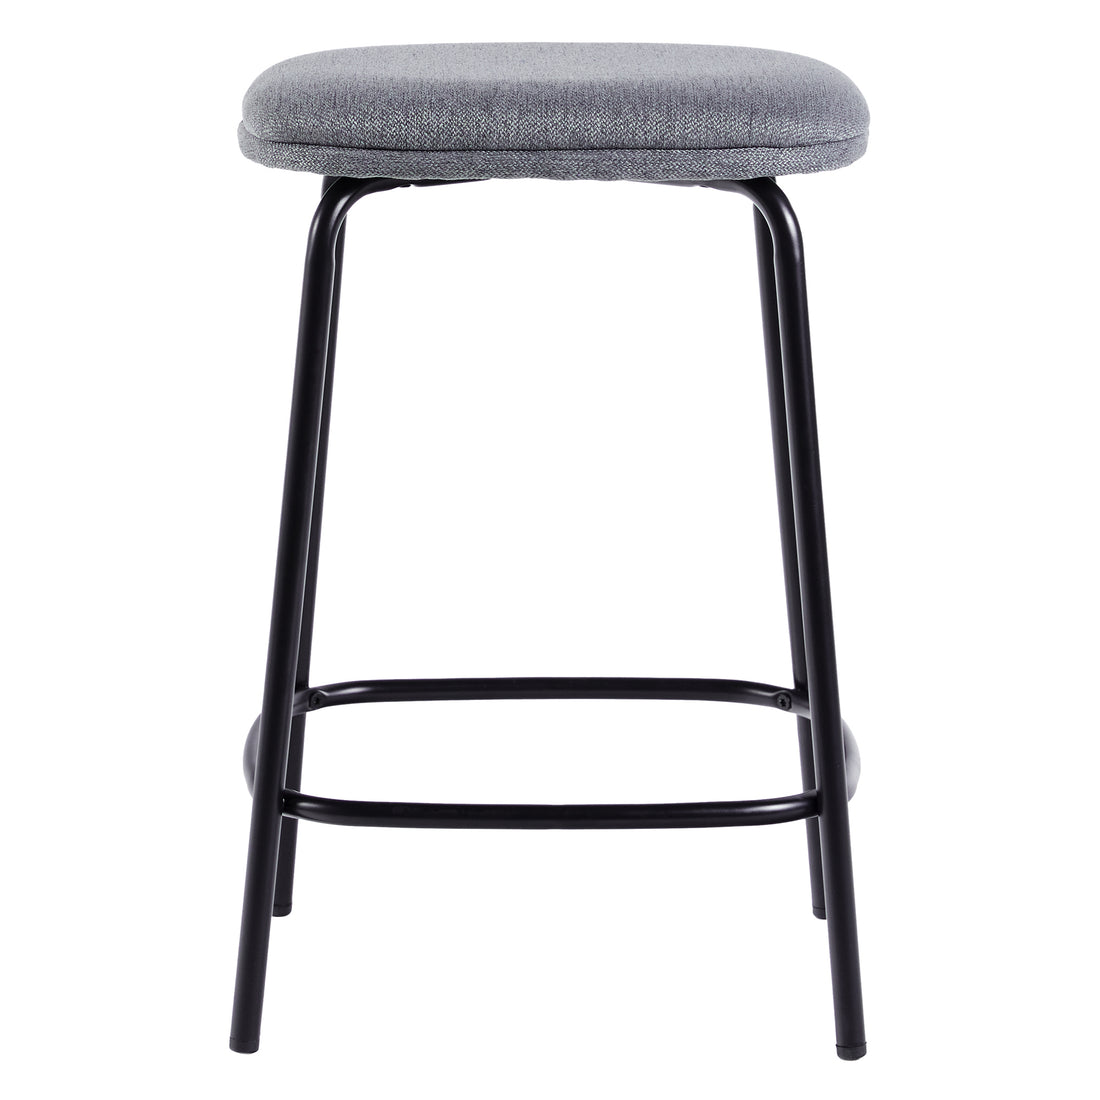 Modern Simple Counter Stool With Upholstered